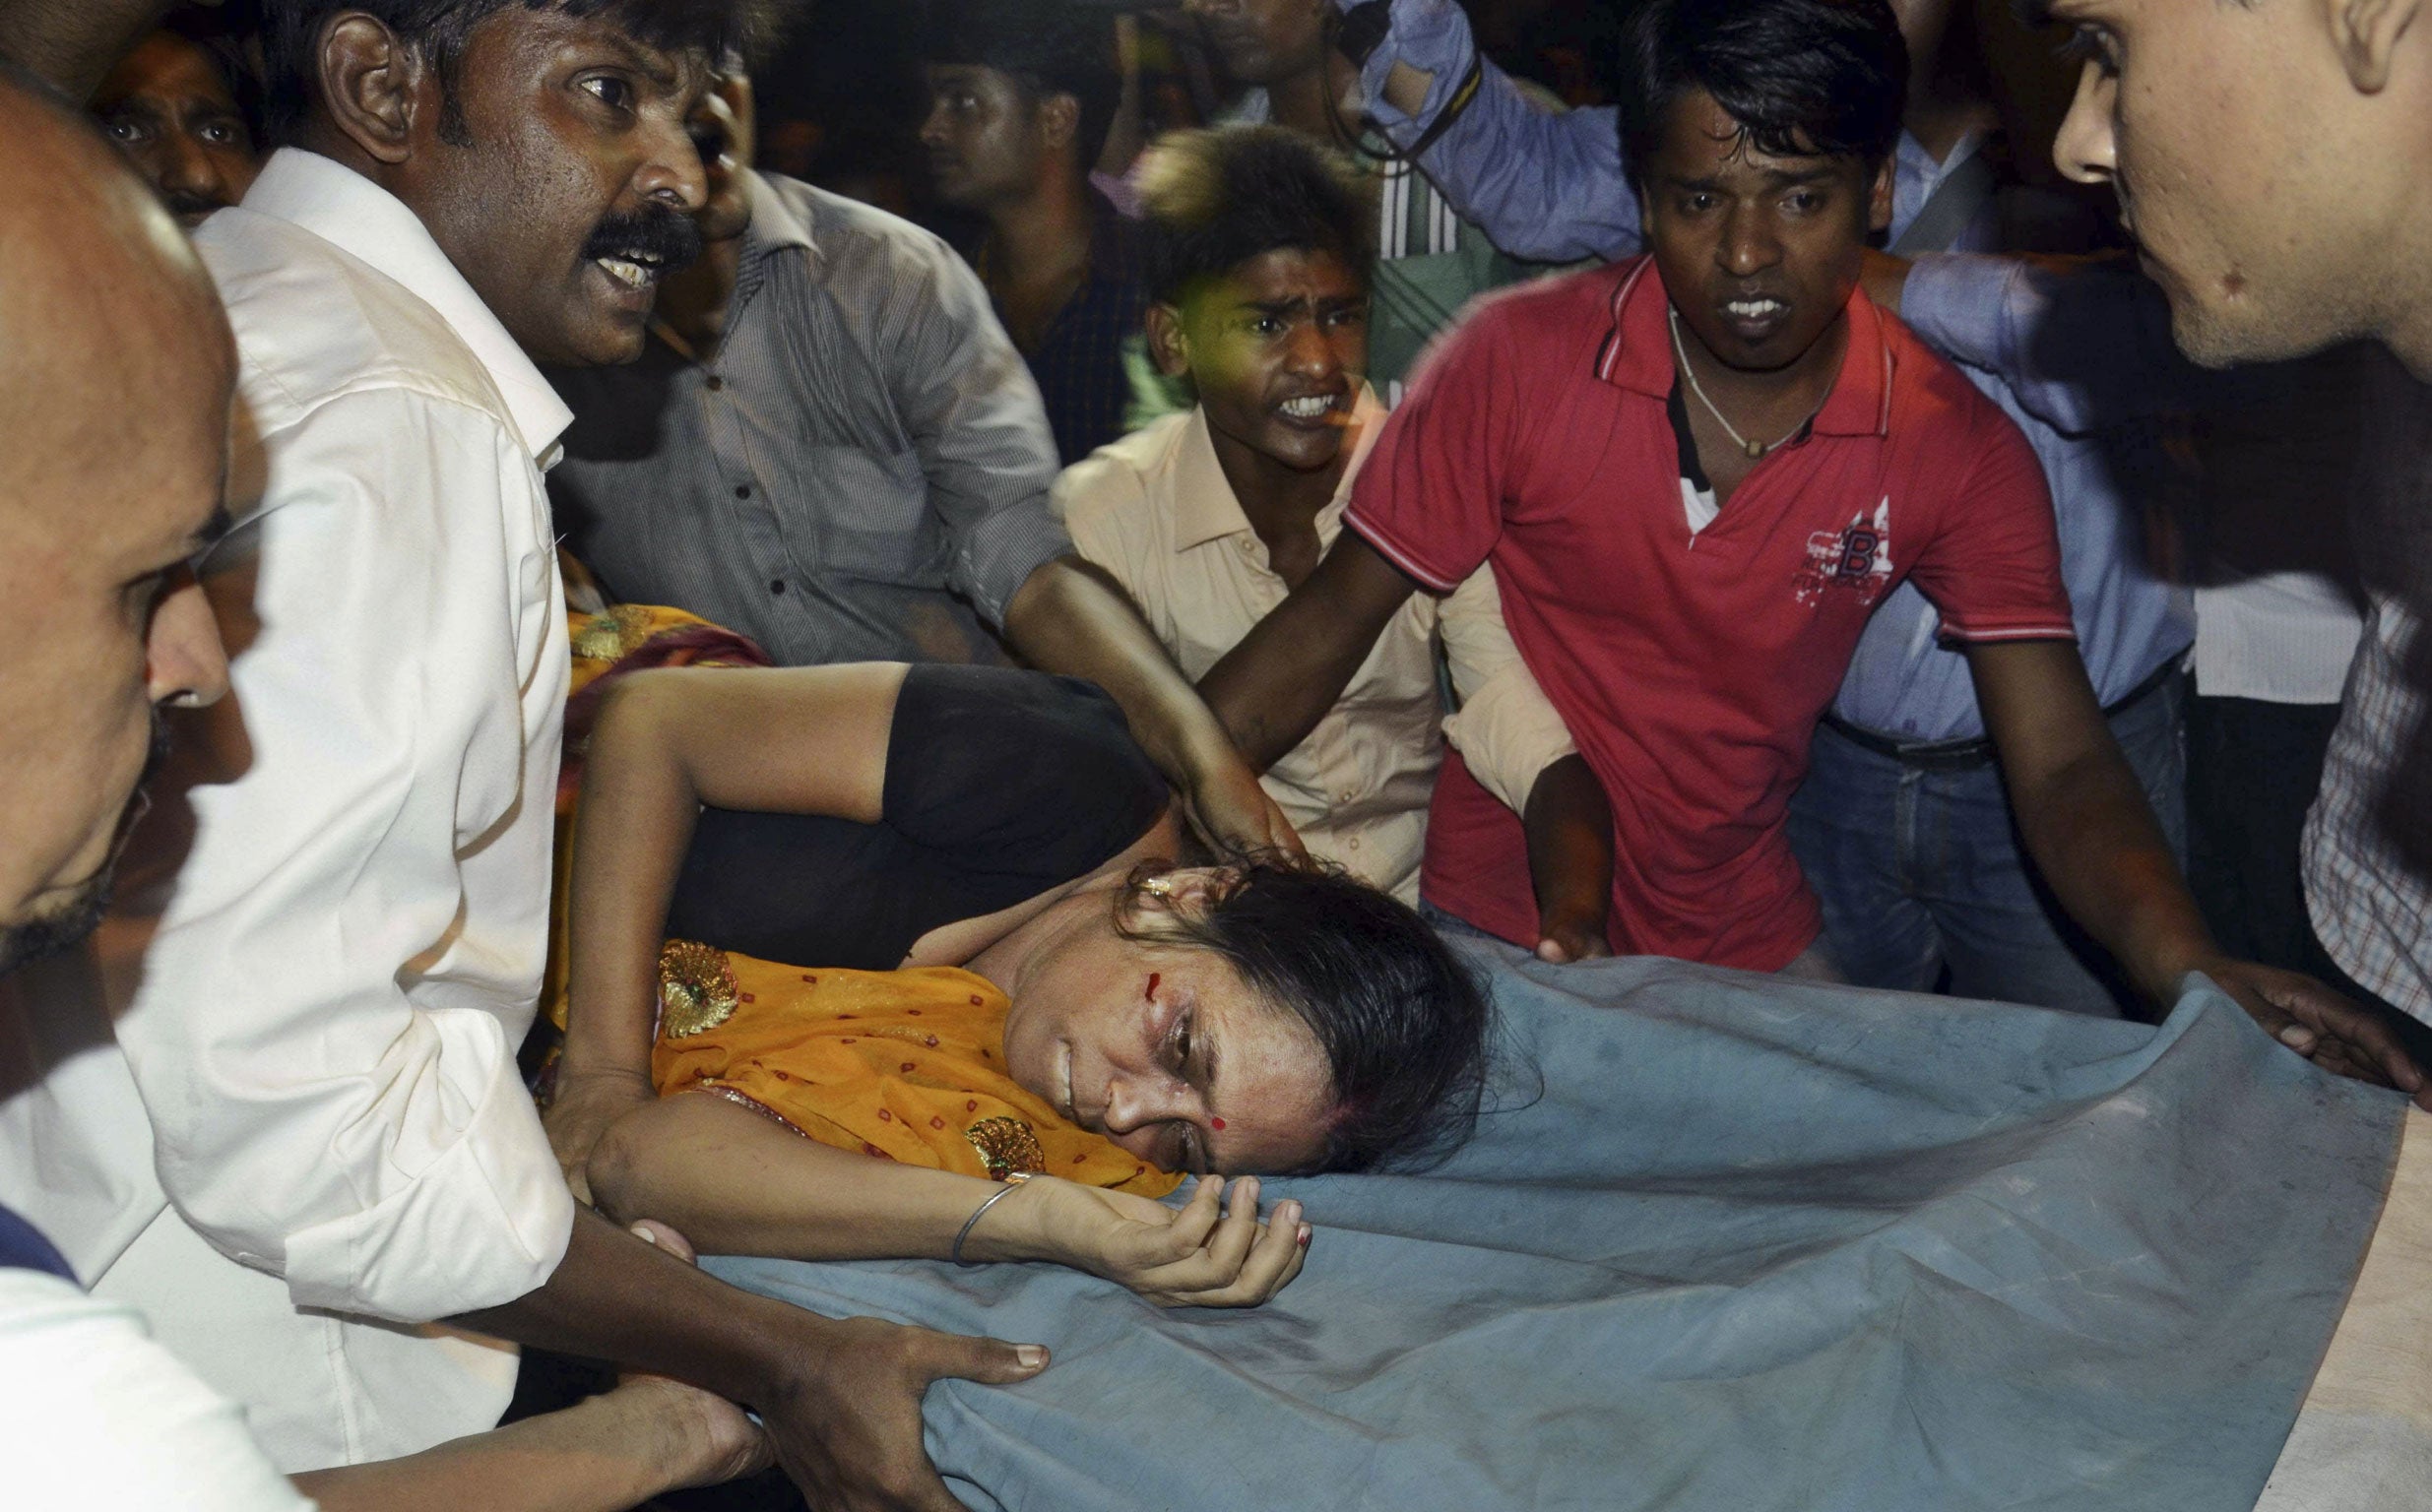 An Injured woman is carried on a stretcher to a hospital for treatment in Patna, India.